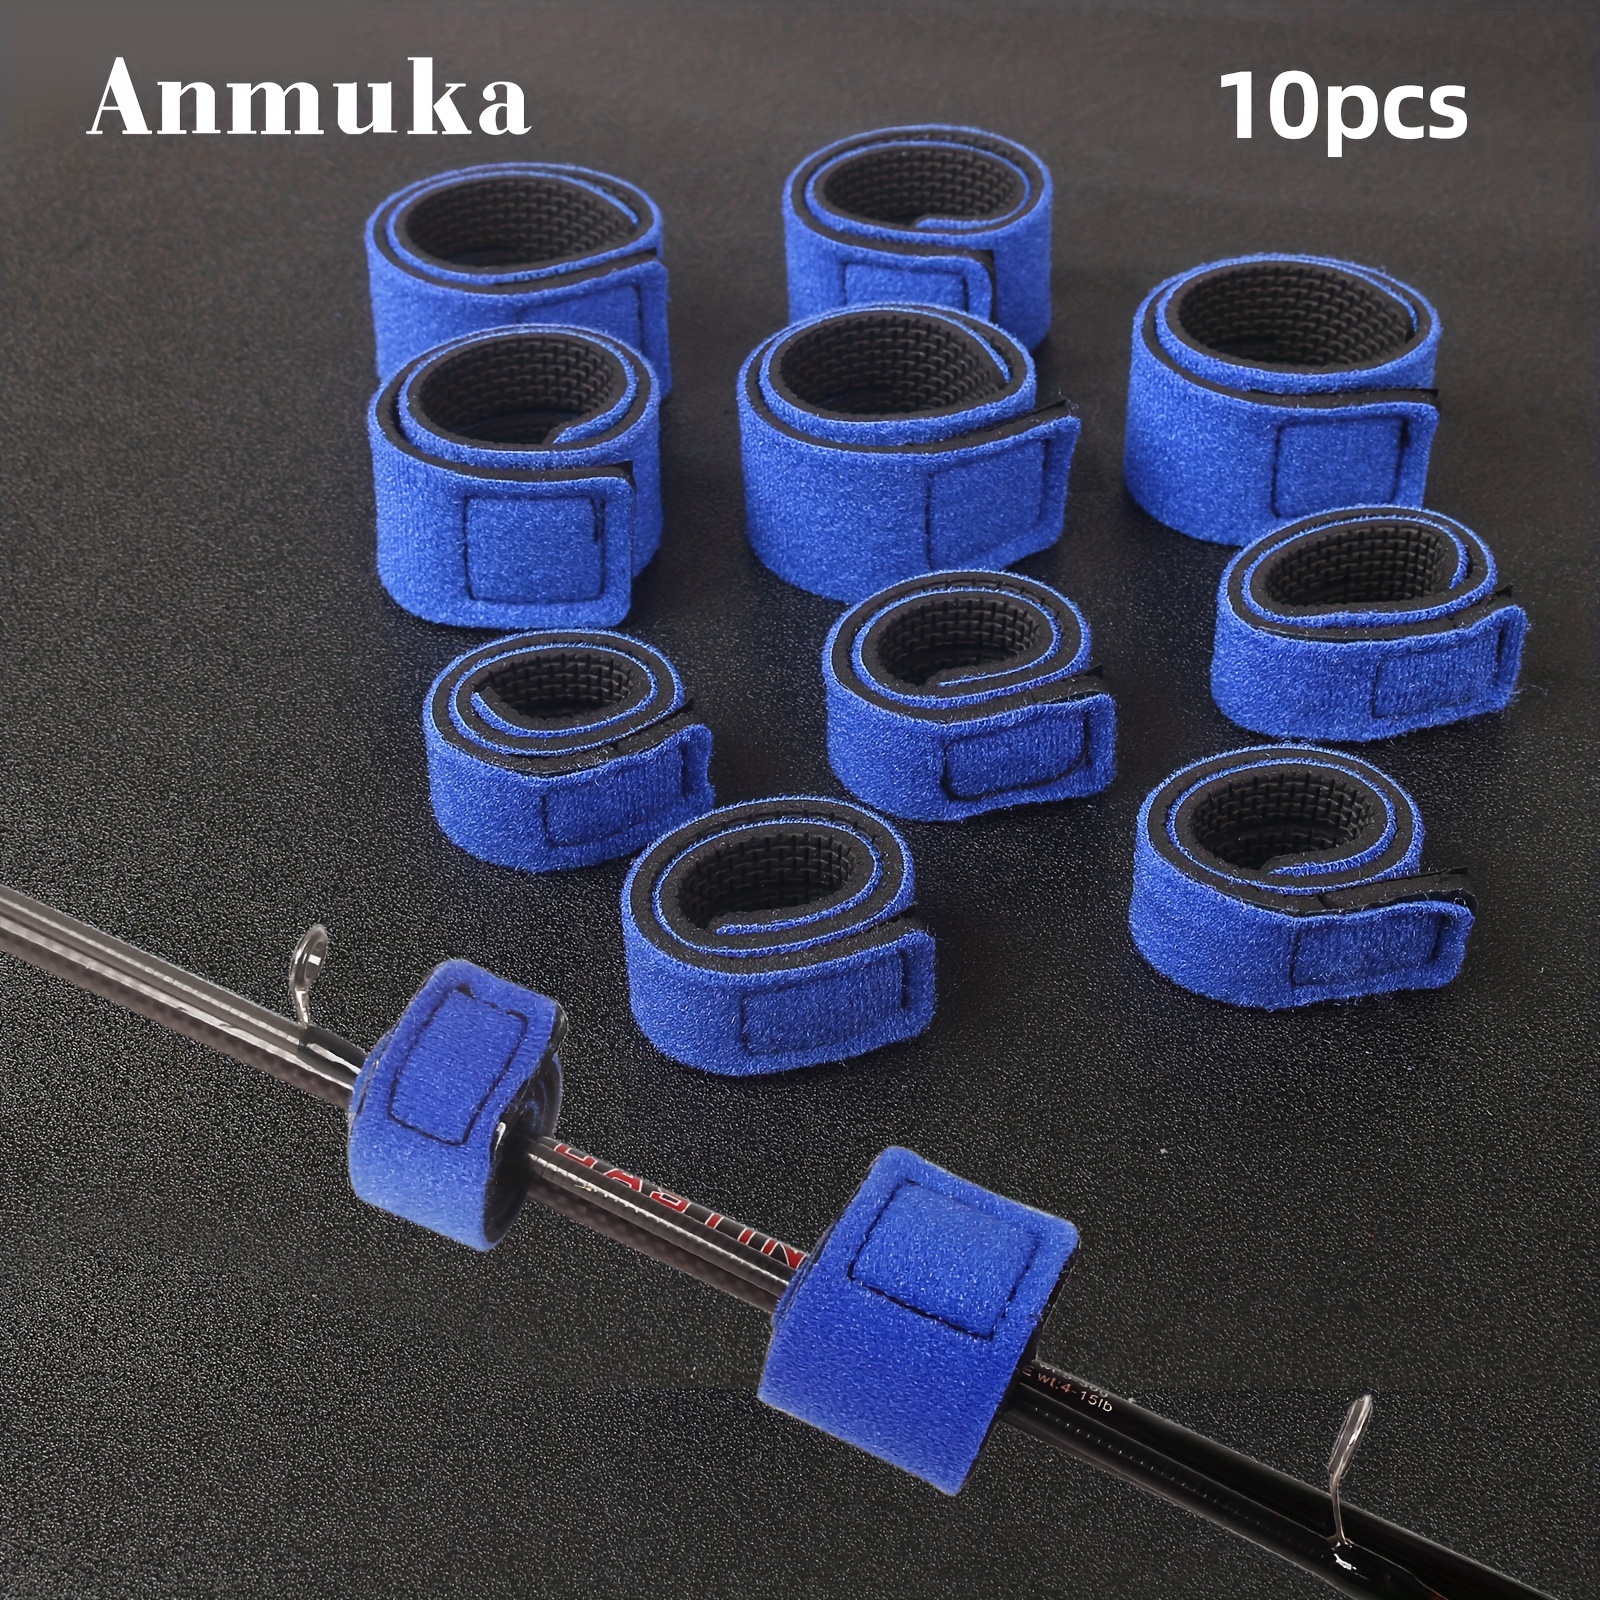 

10 Pieces Of Fishing Rod Wraps, Elastic Tie-downs, Fishing Rod Holder